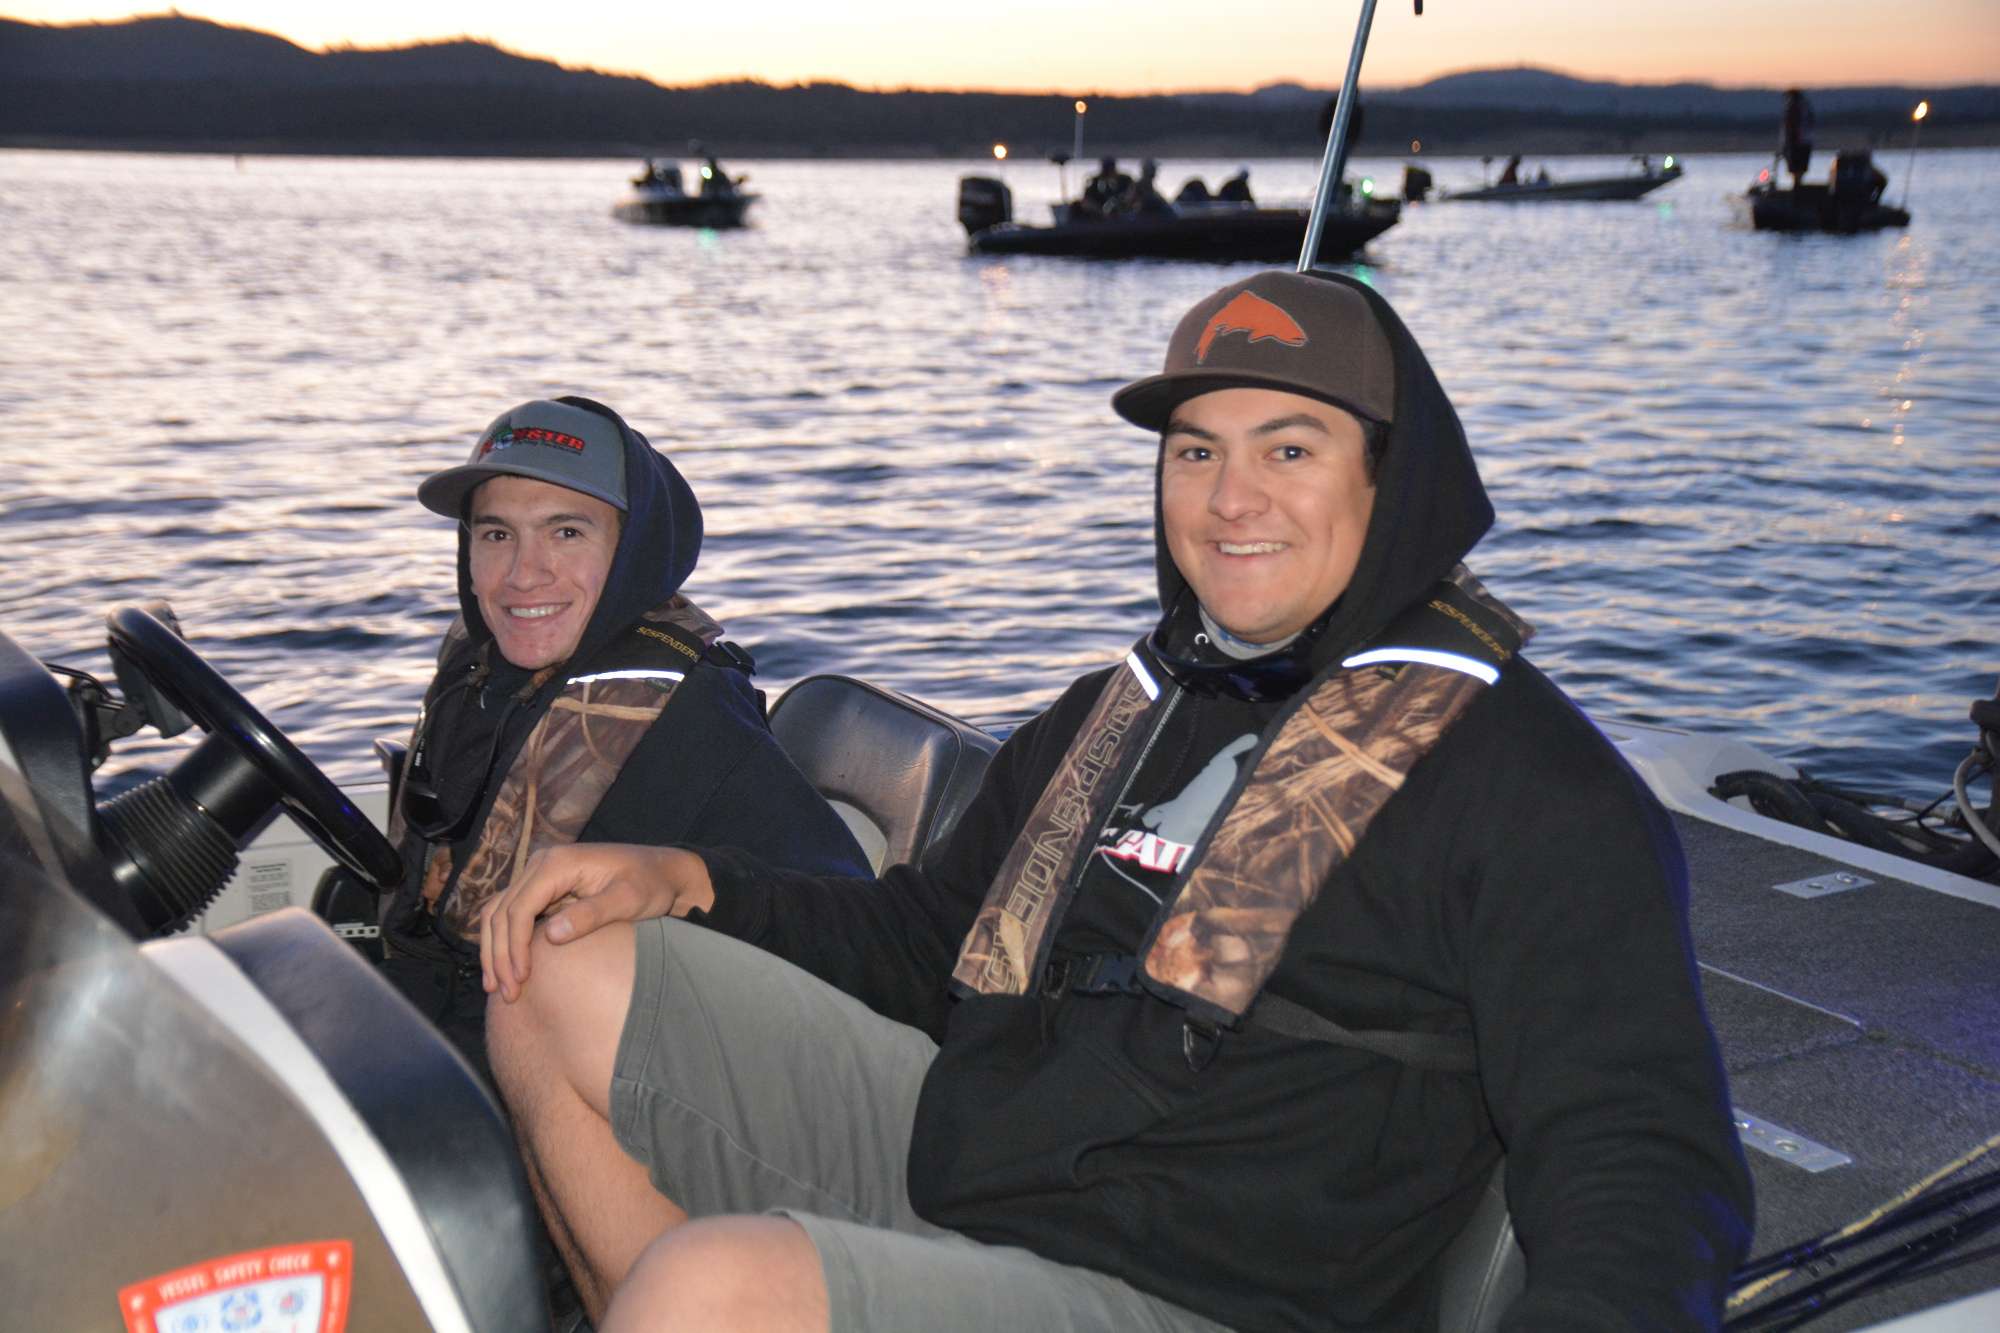 Alex Robbins and Rudy Directo of Humboldt State University let the charge as the first boat in the lineup.